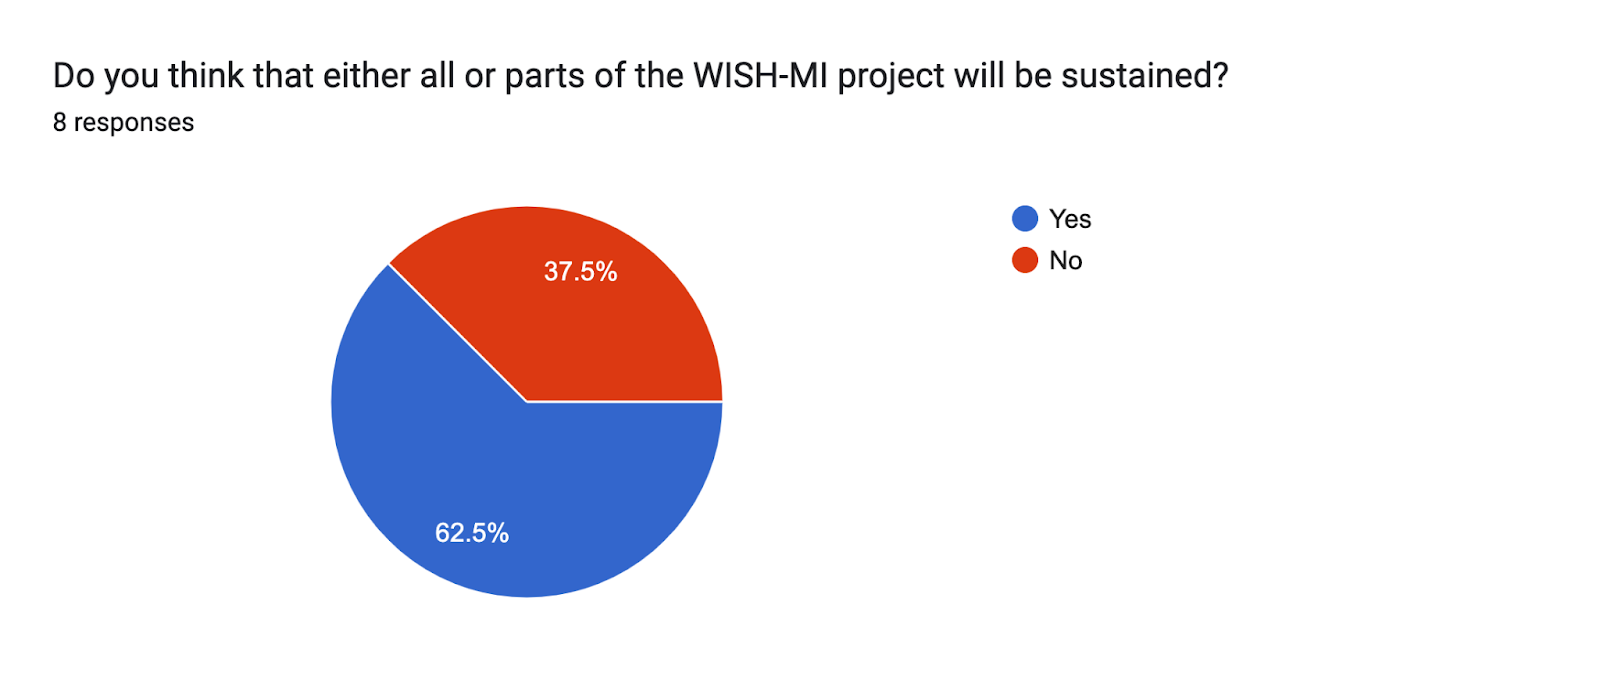 Forms response chart. Question title: Do you think that either all or parts of the WISH-MI project will be sustained?
. Number of responses: 8 responses.